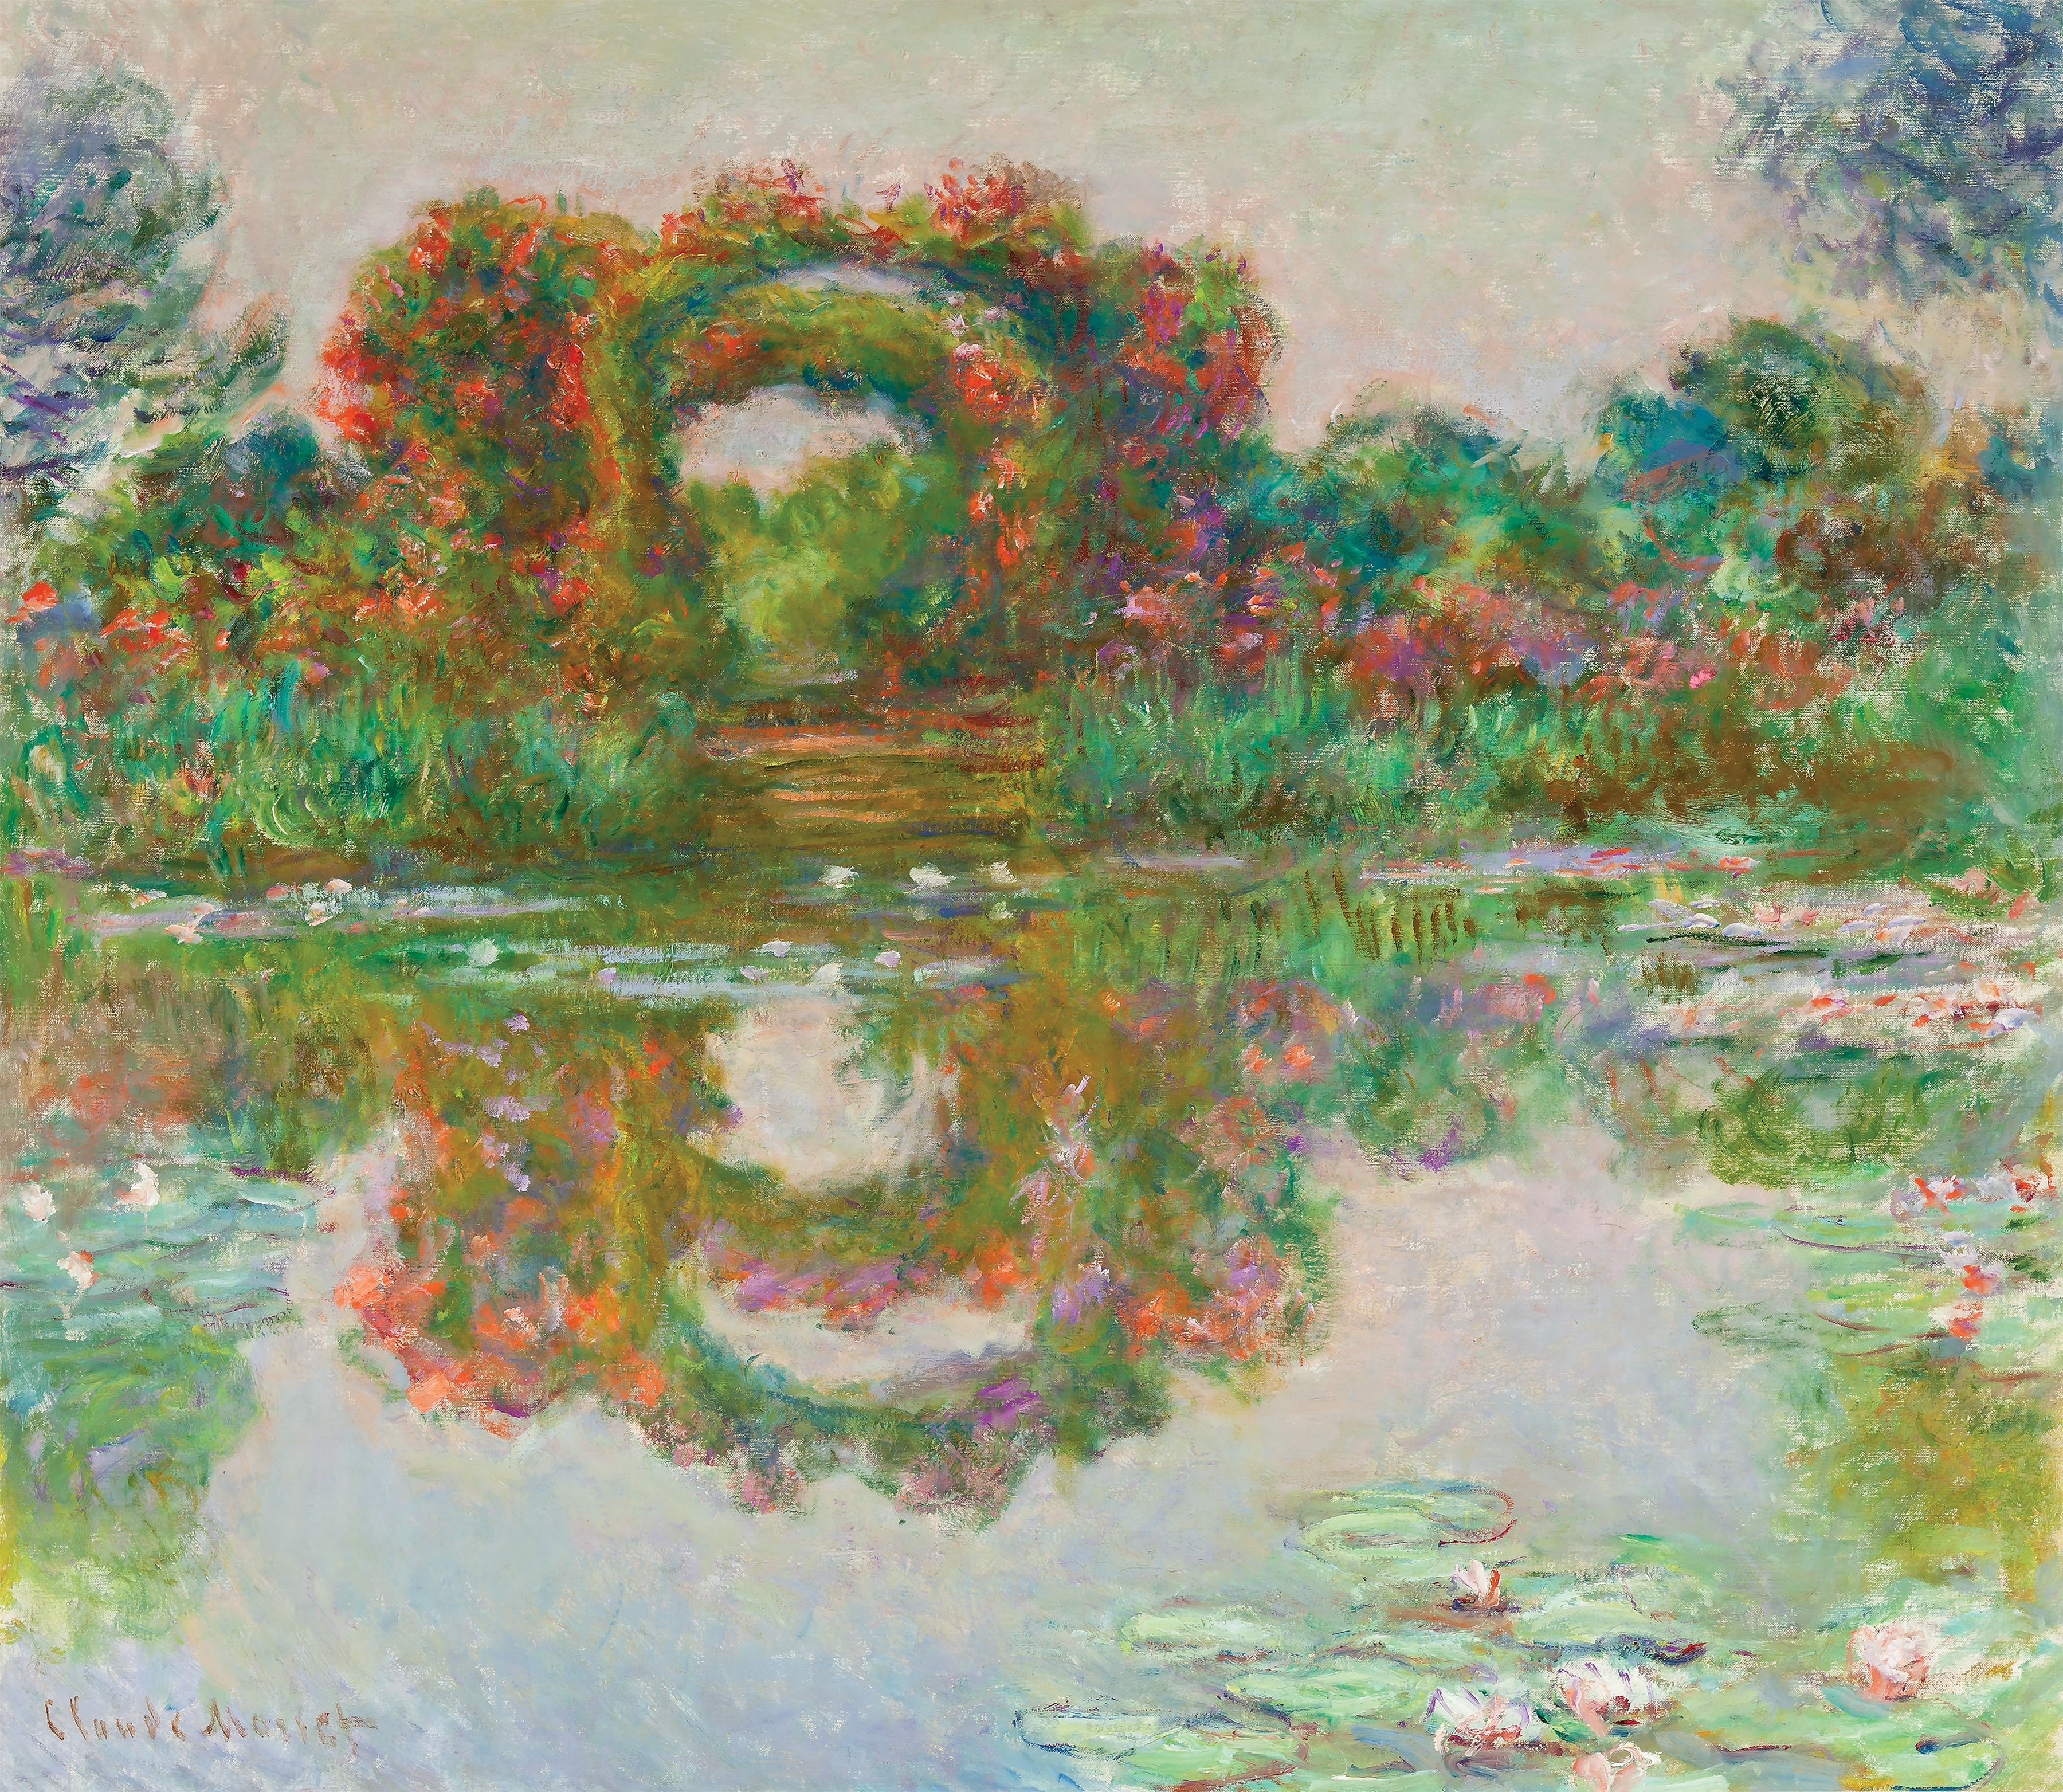 Claude Monet, Les arceaux fleuris, Giverny (Flowering Arches, Giverny), 1913. Oil on canvas. Collection Phoenix Art Museum. Gift of Mr. and Mrs. Donald D. Harrington.